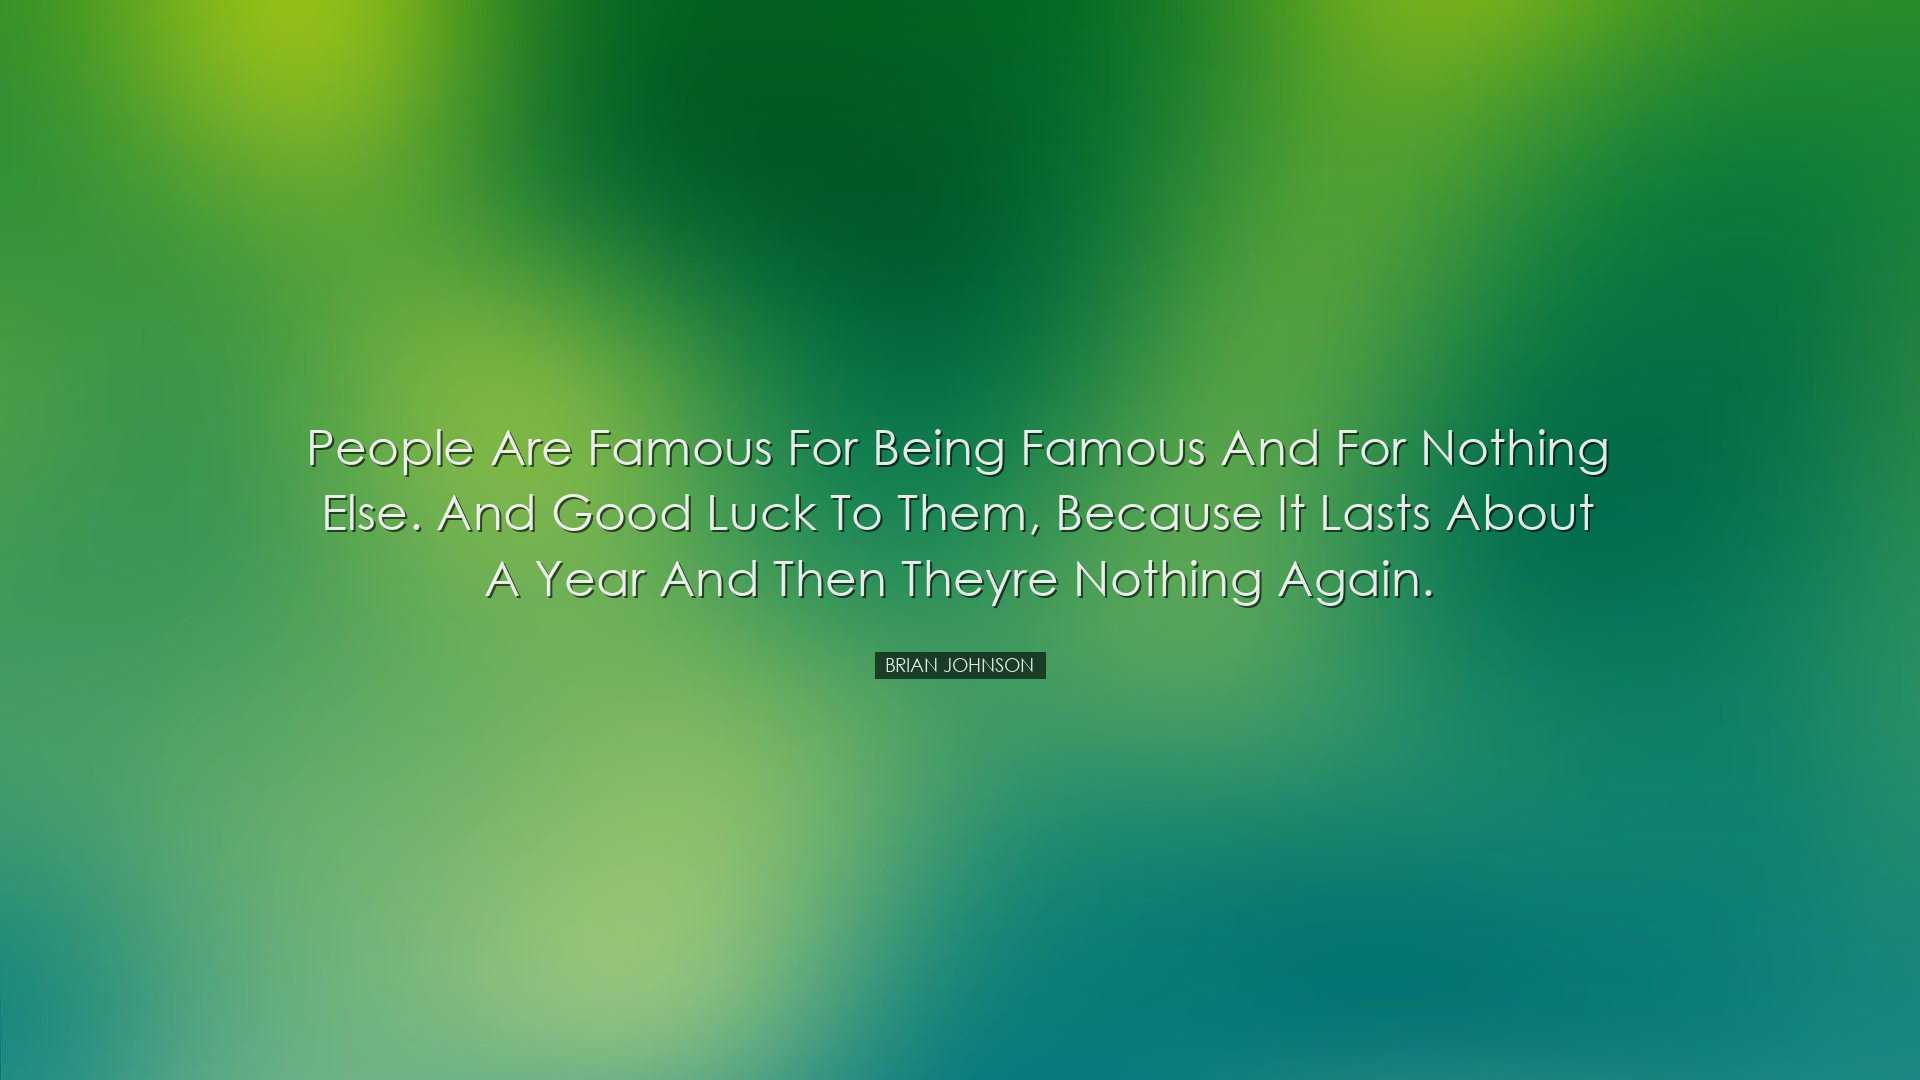 People are famous for being famous and for nothing else. And good